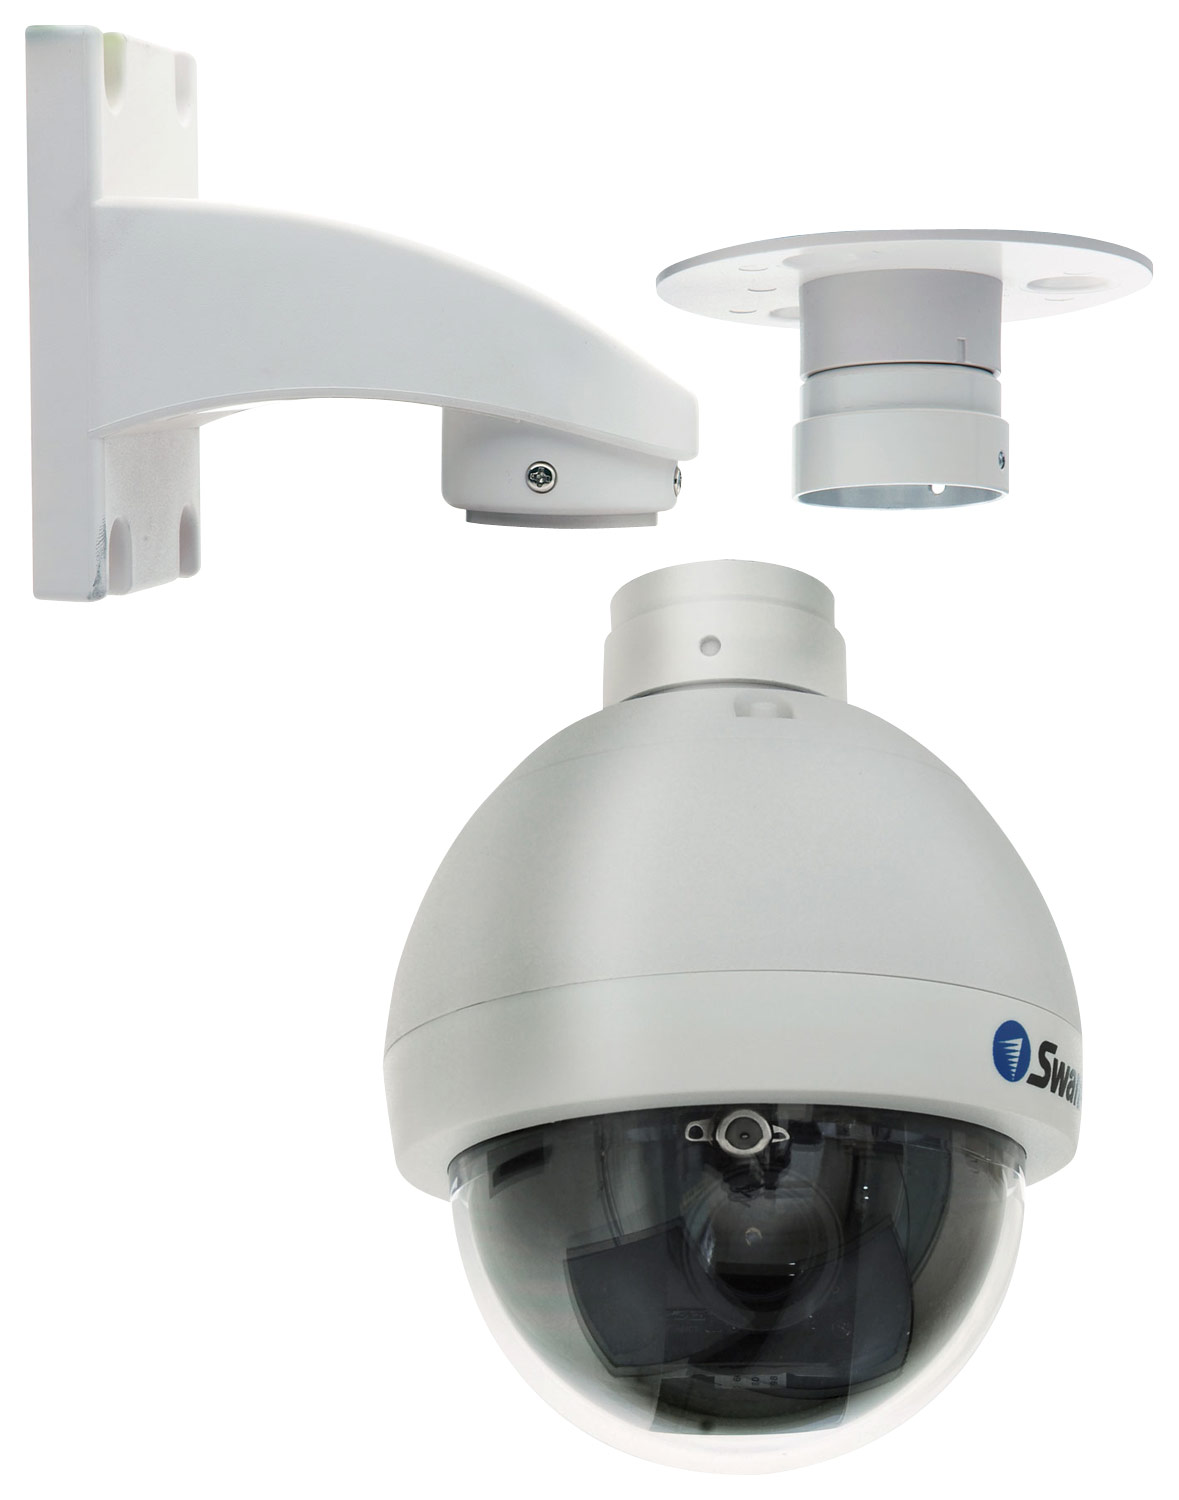 Customer Reviews: Swann PRO-752 Indoor/Outdoor Dome Security Camera ...